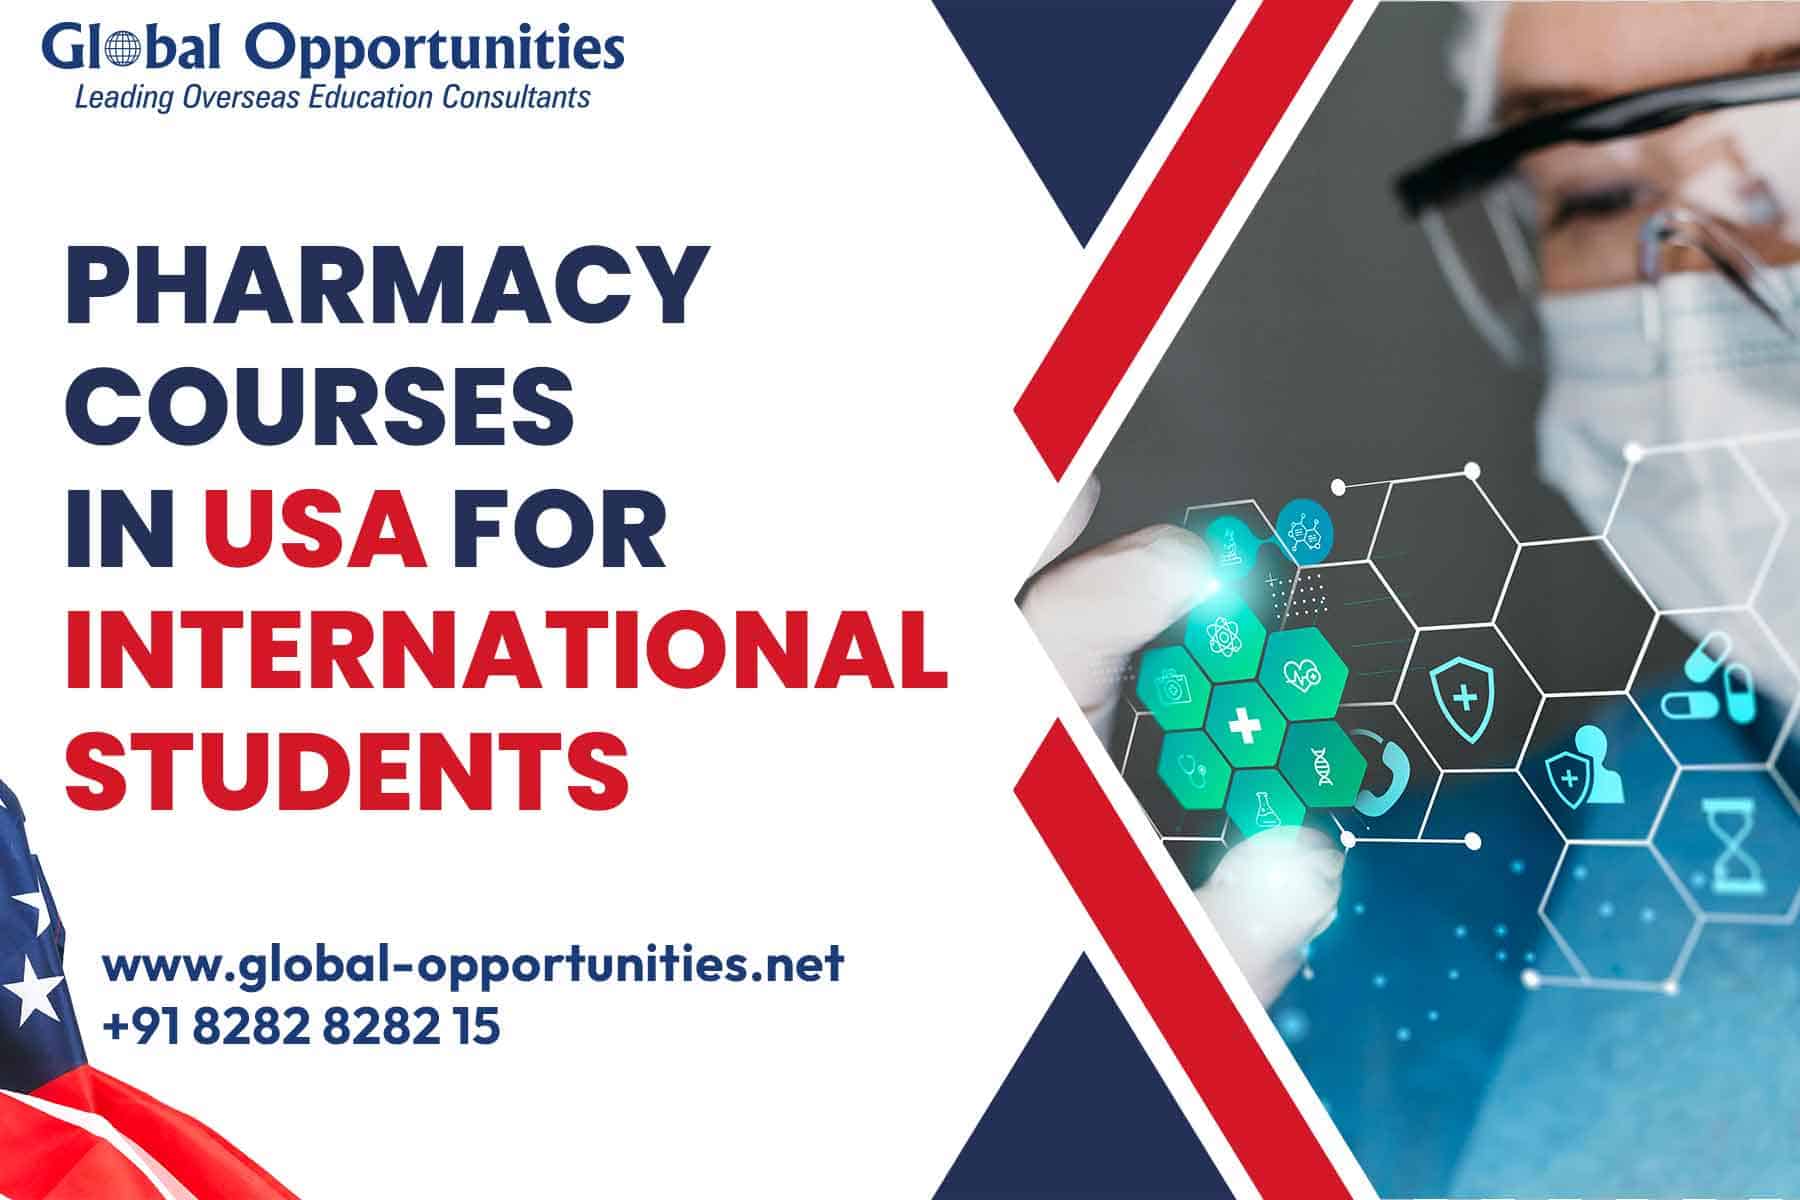 Pharmacy Courses in USA for International Students